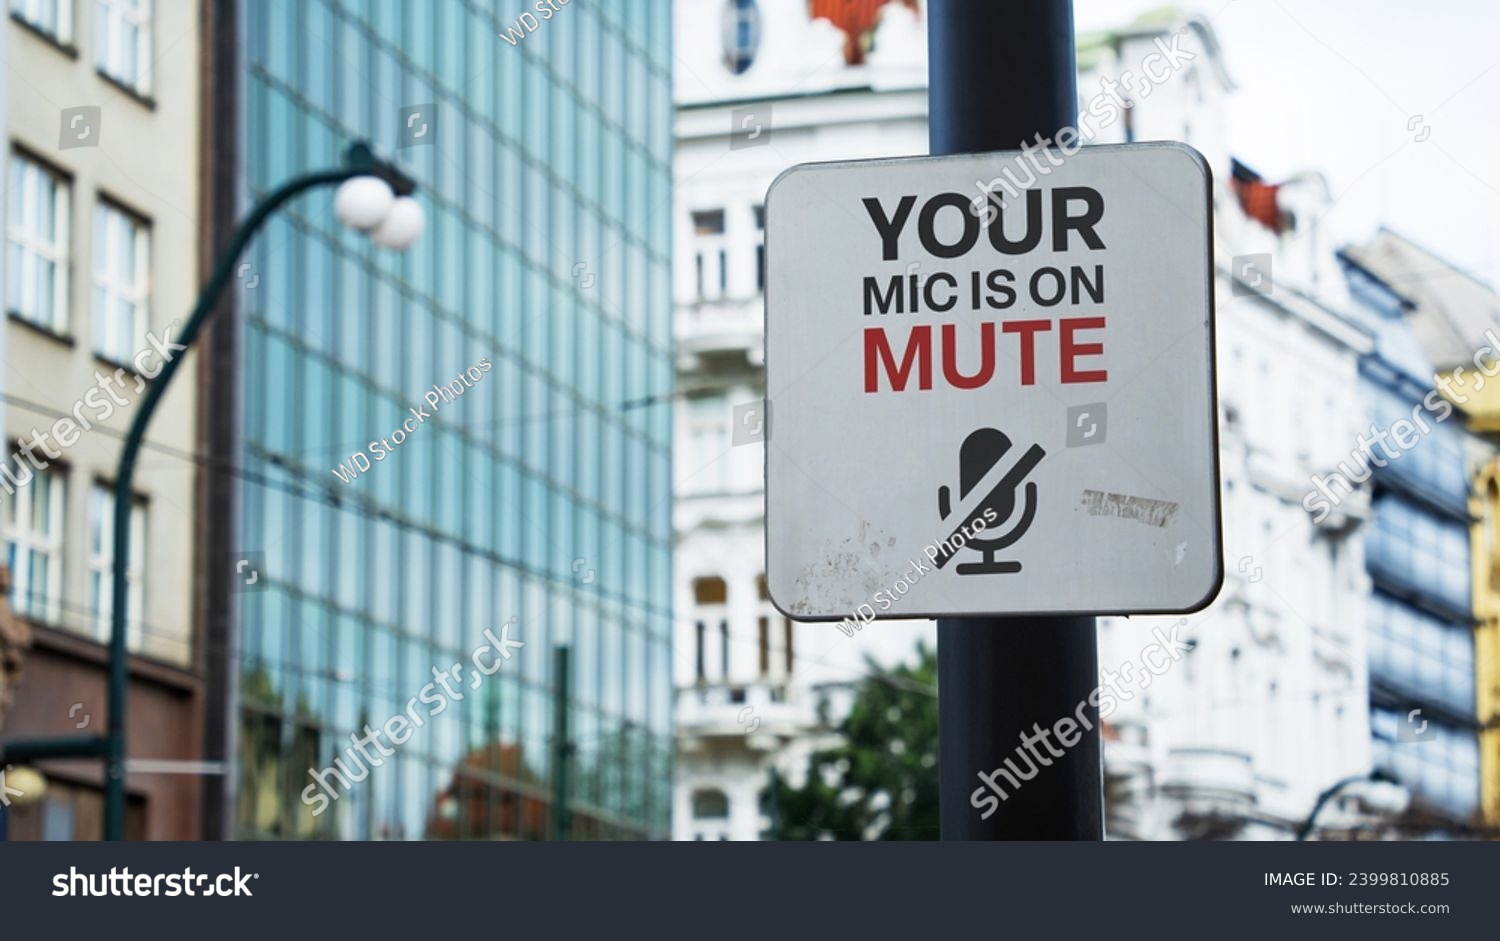 Your mic is on mute sign in a city business district #2399810885